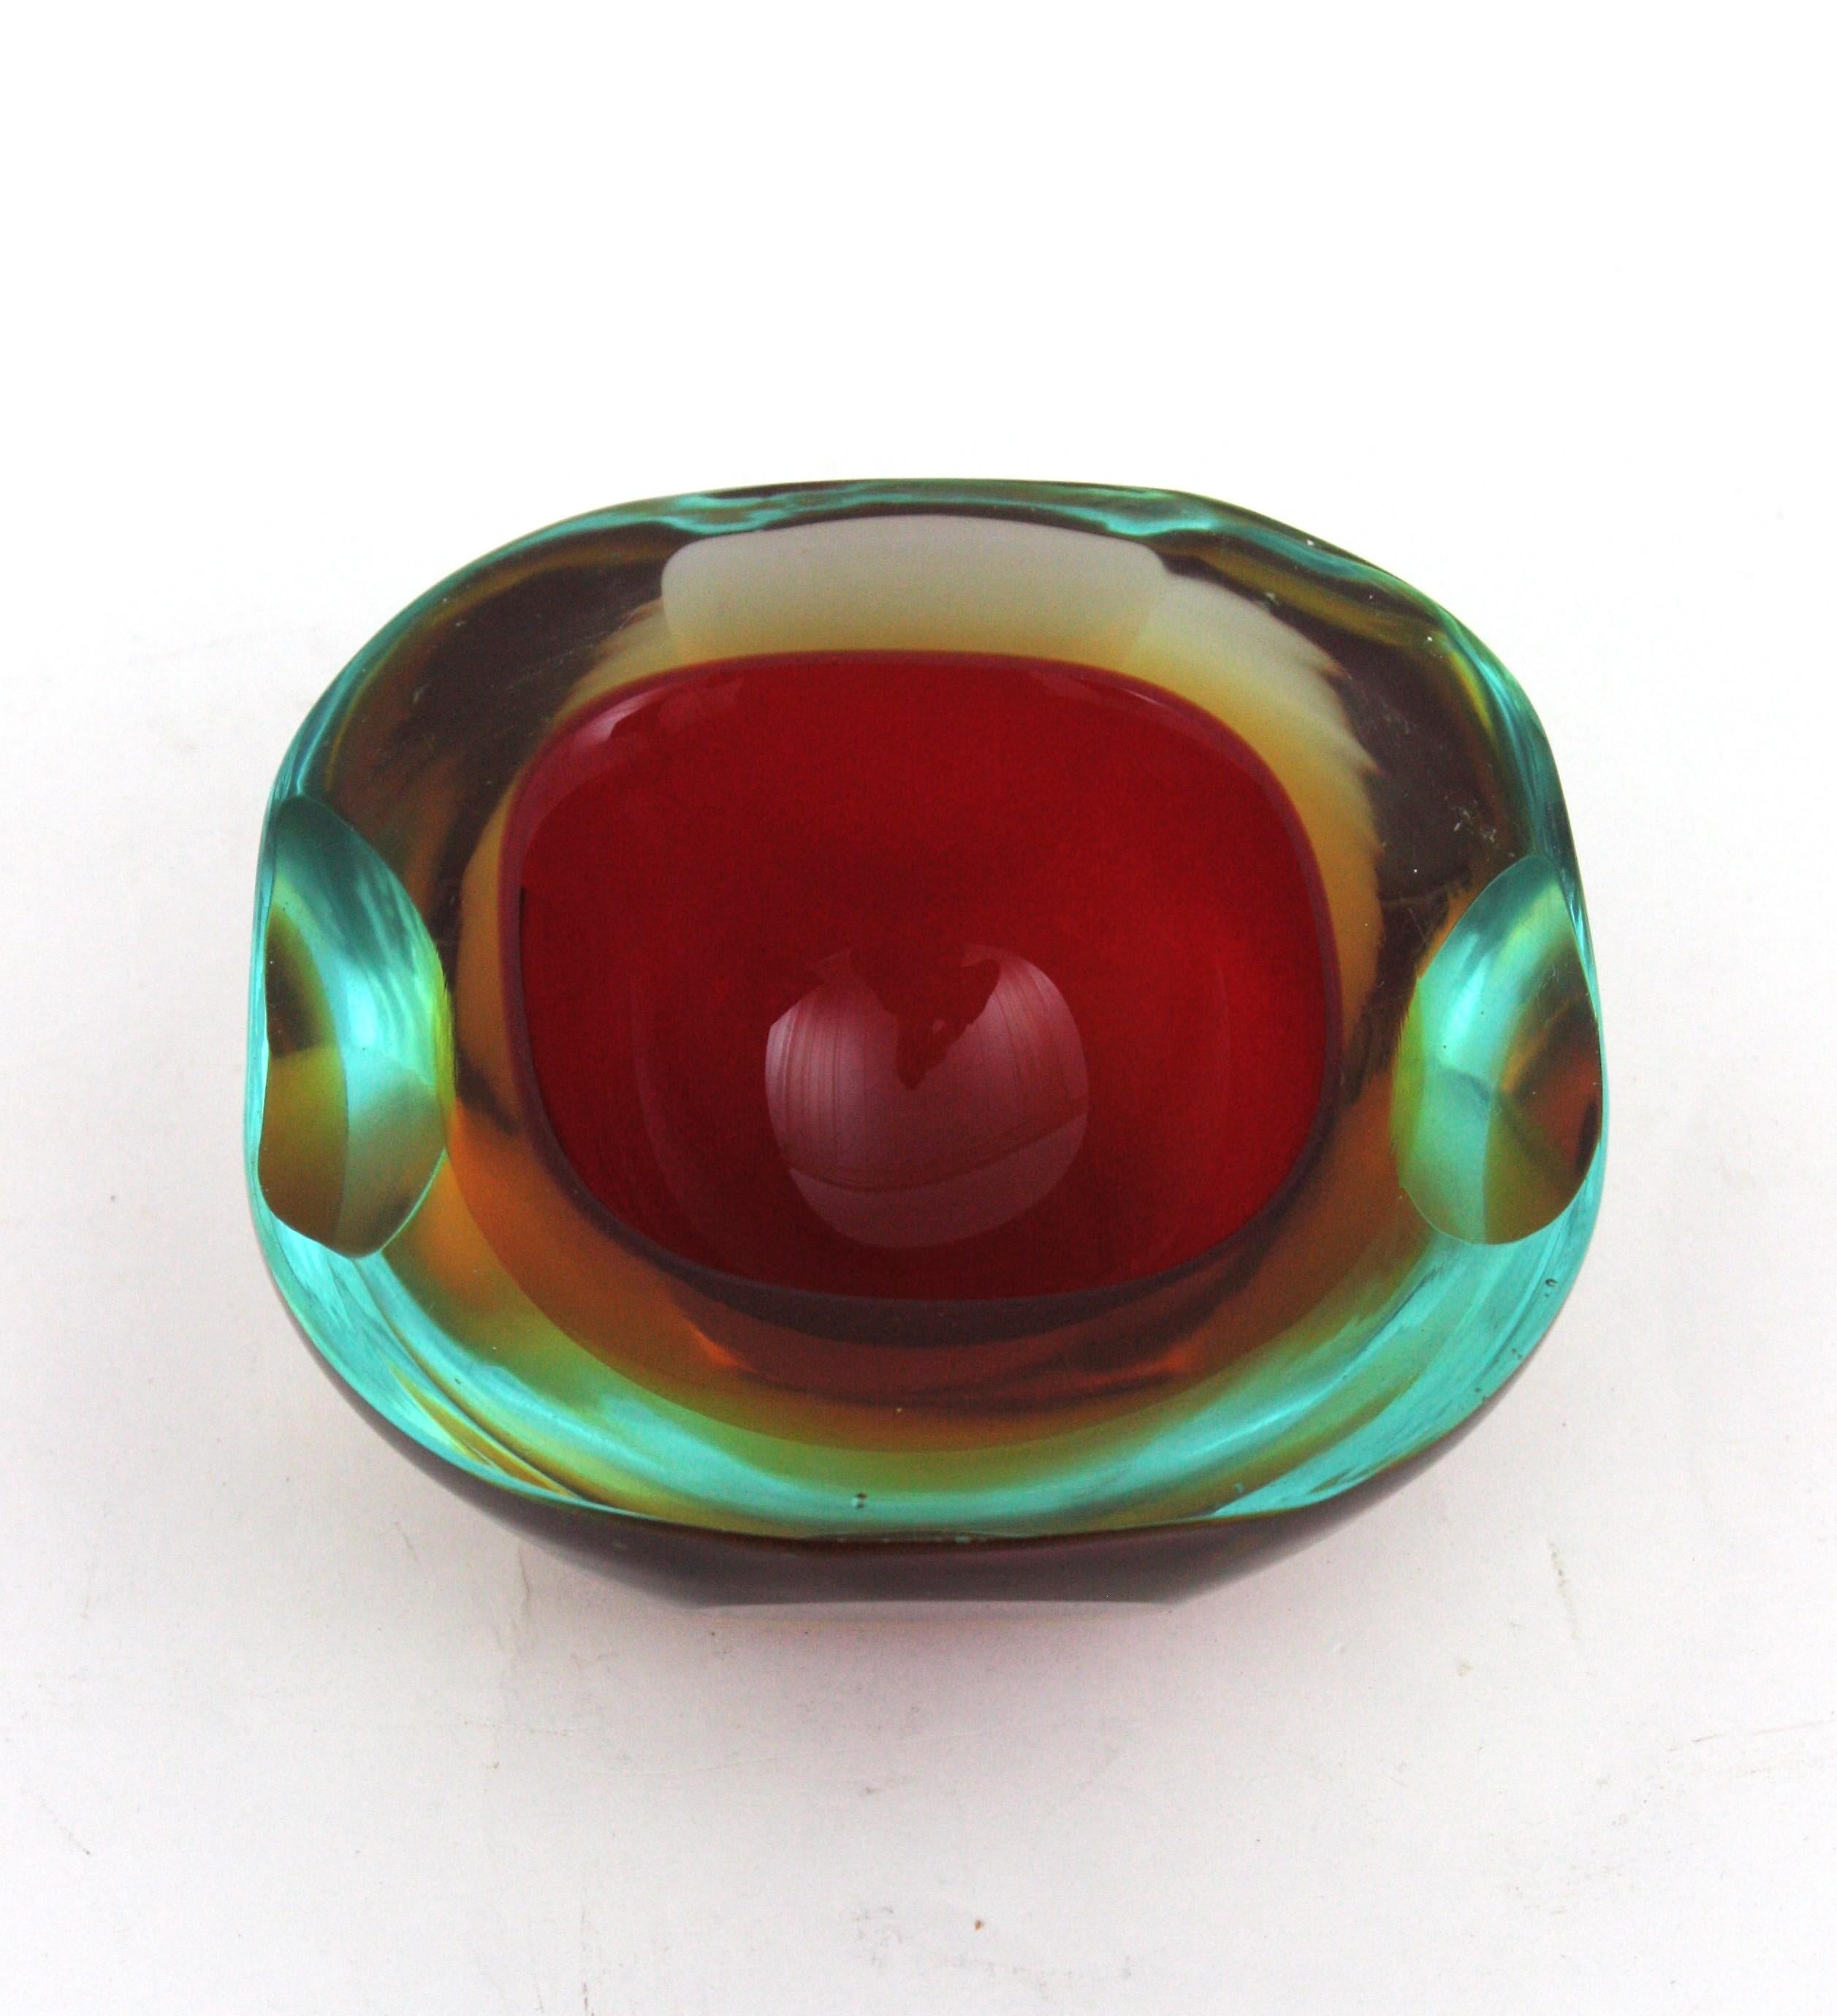 Hand-Crafted Flavio Poli Seguso Murano Sommerso Red Art Glass Geode Bowl